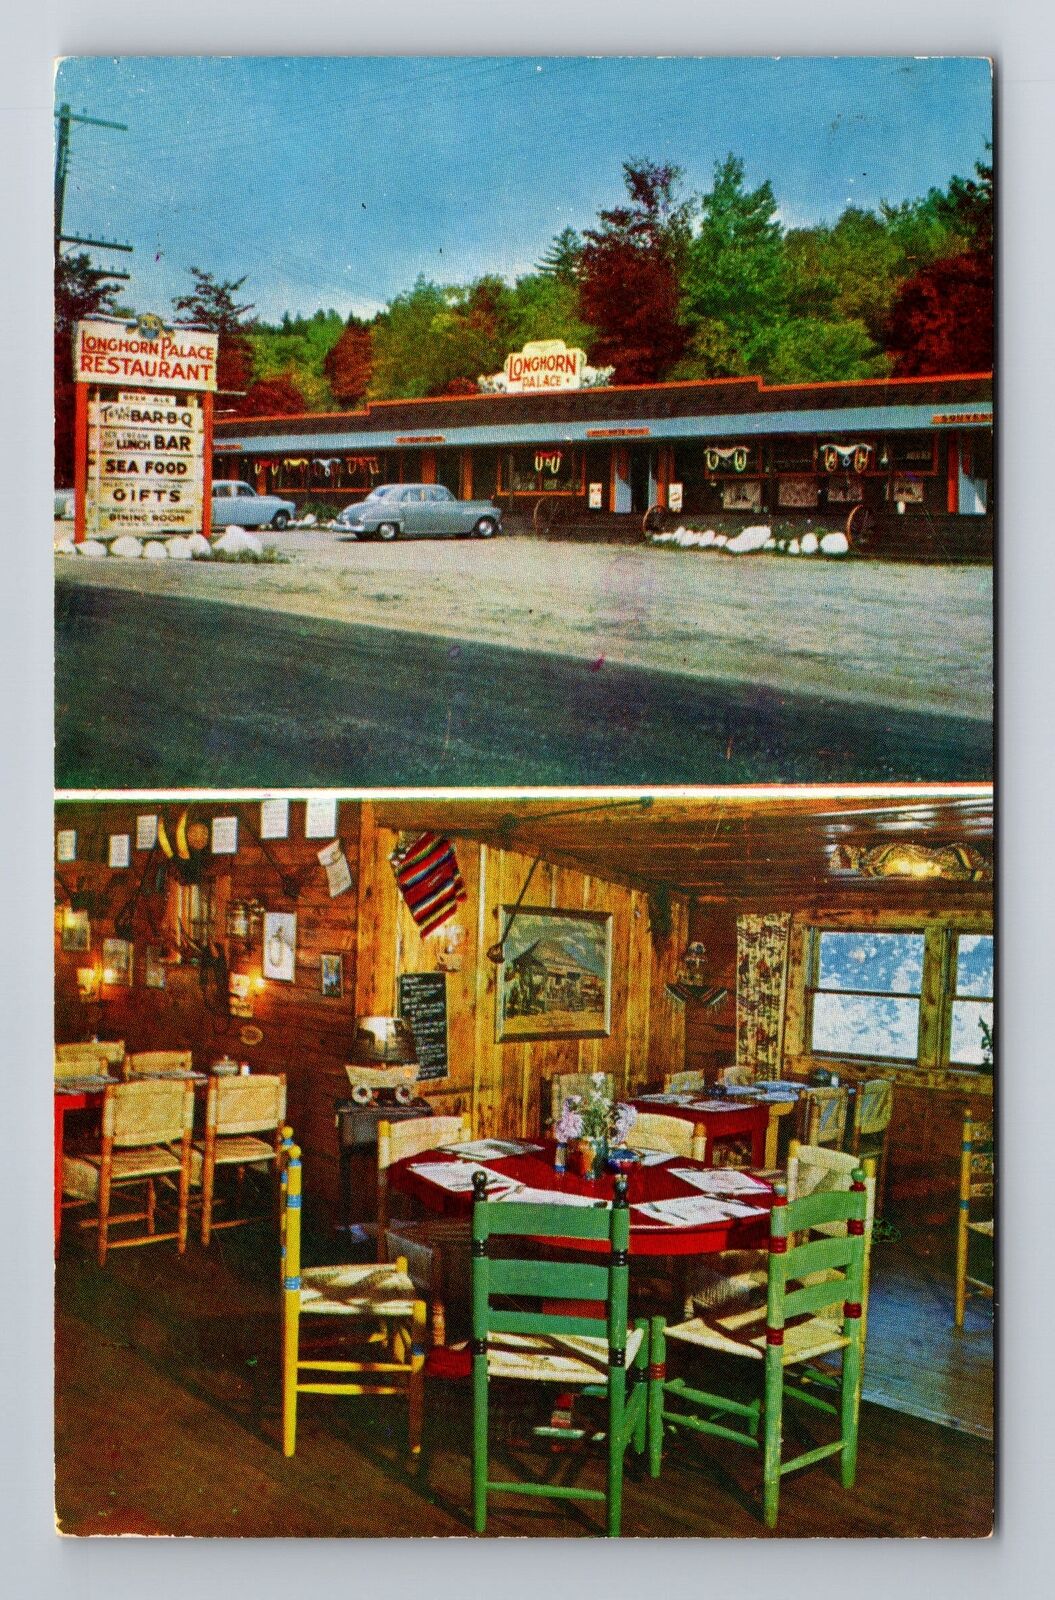 North Woodstock NH-New Hampshire, The Longhorn Palace, Antique Vintage Postcard